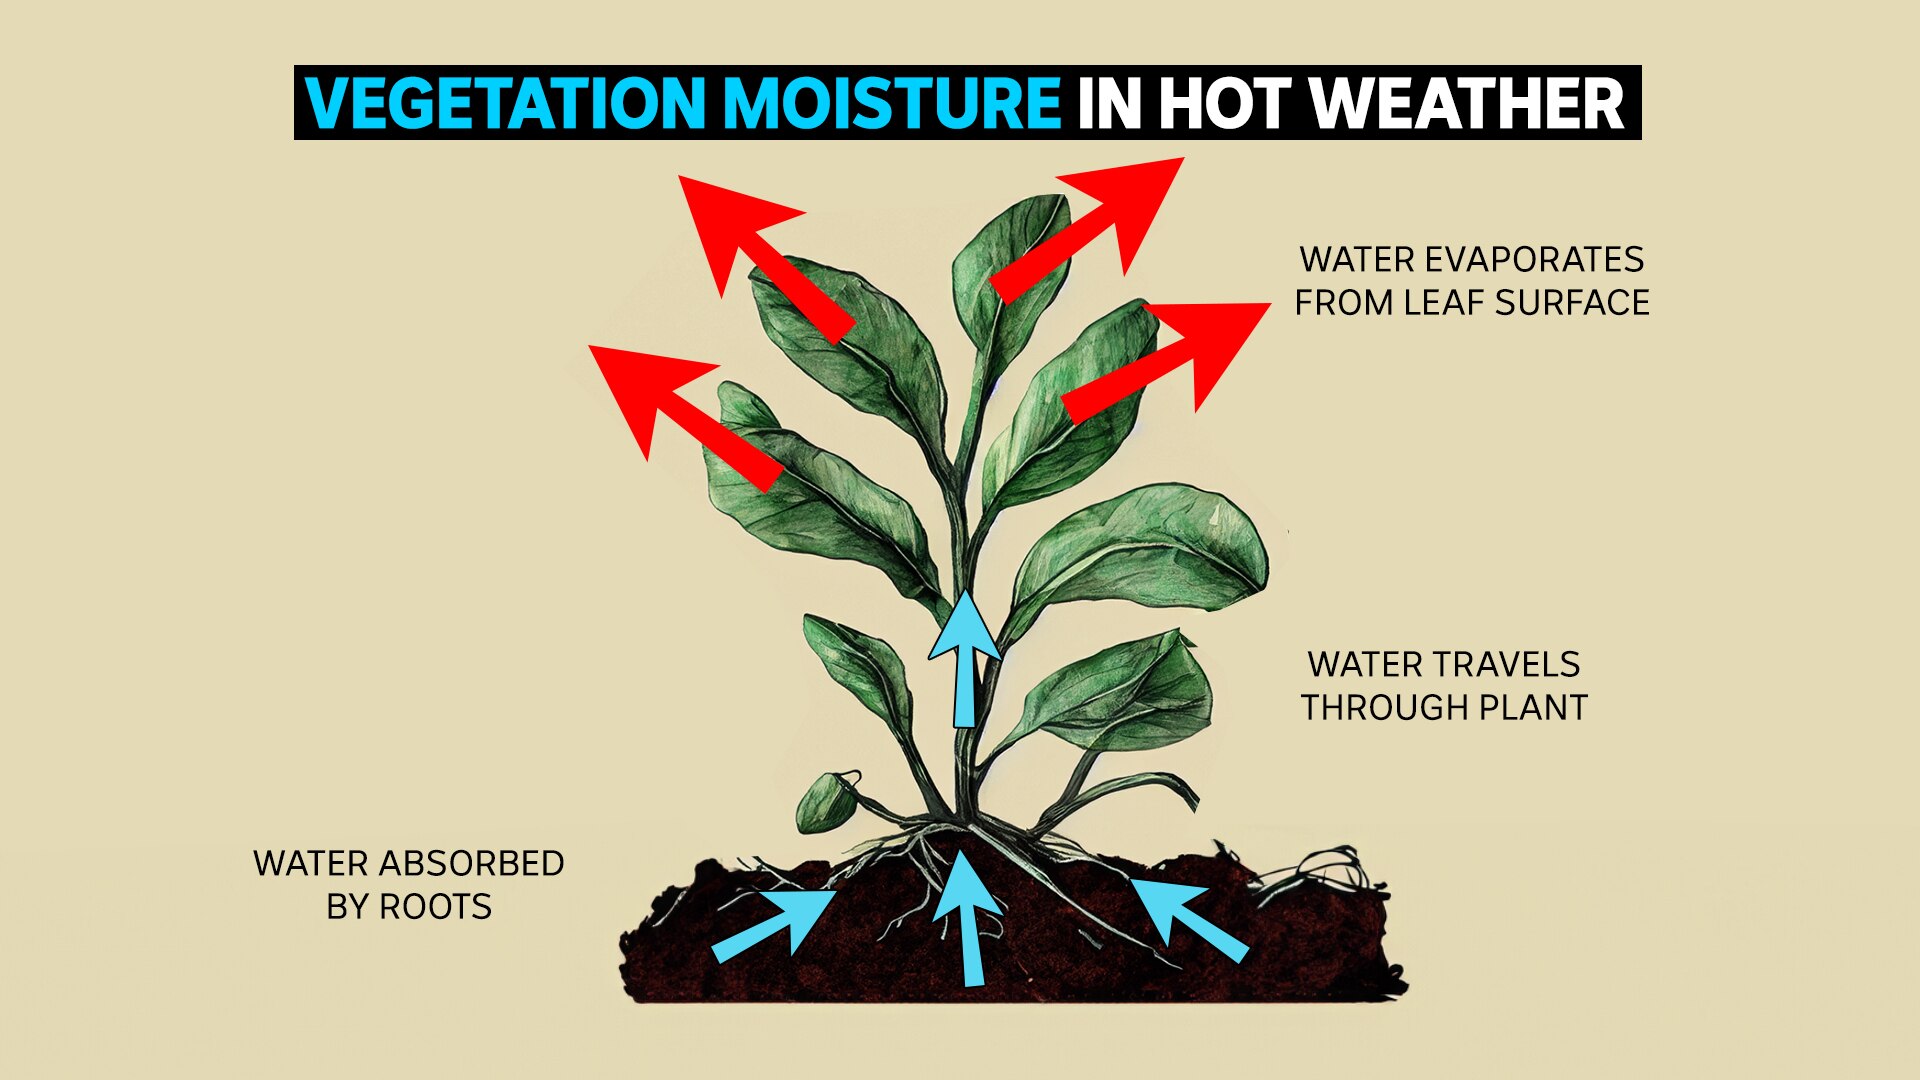 Graphic showing vegetation moisture levels in hot weather